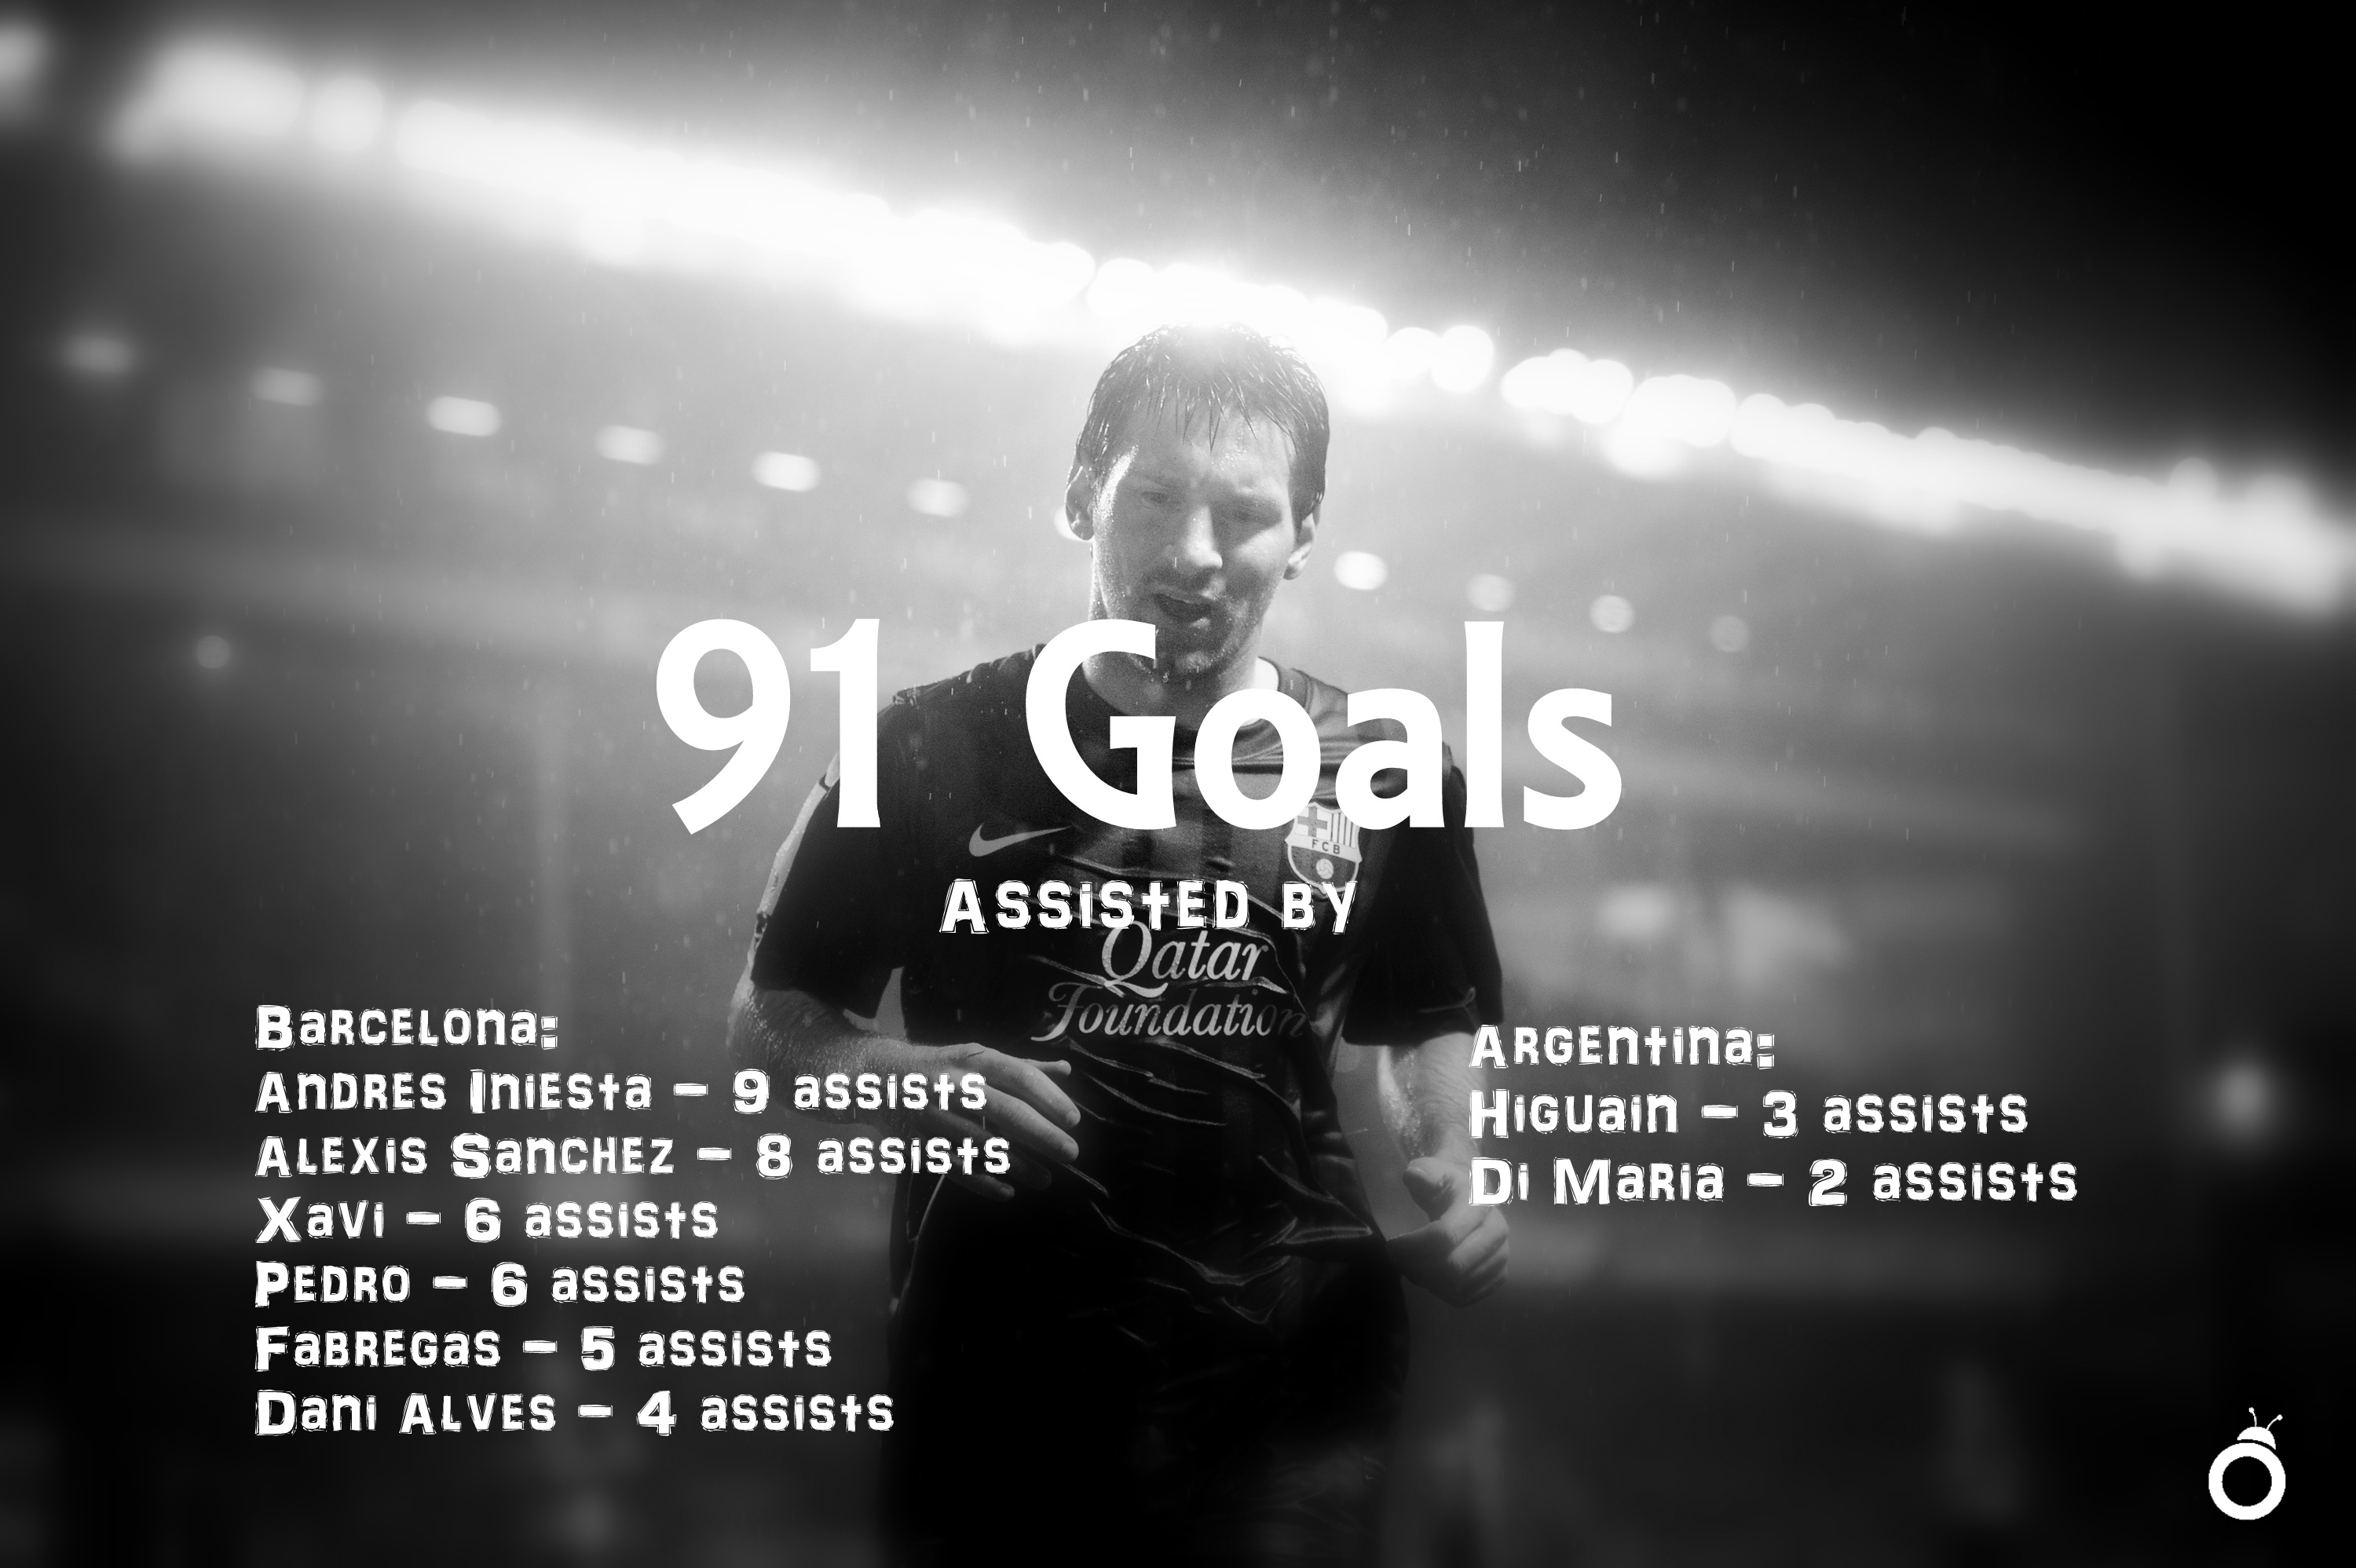 The assist providers for Messi's 91 goals3000 x 1997